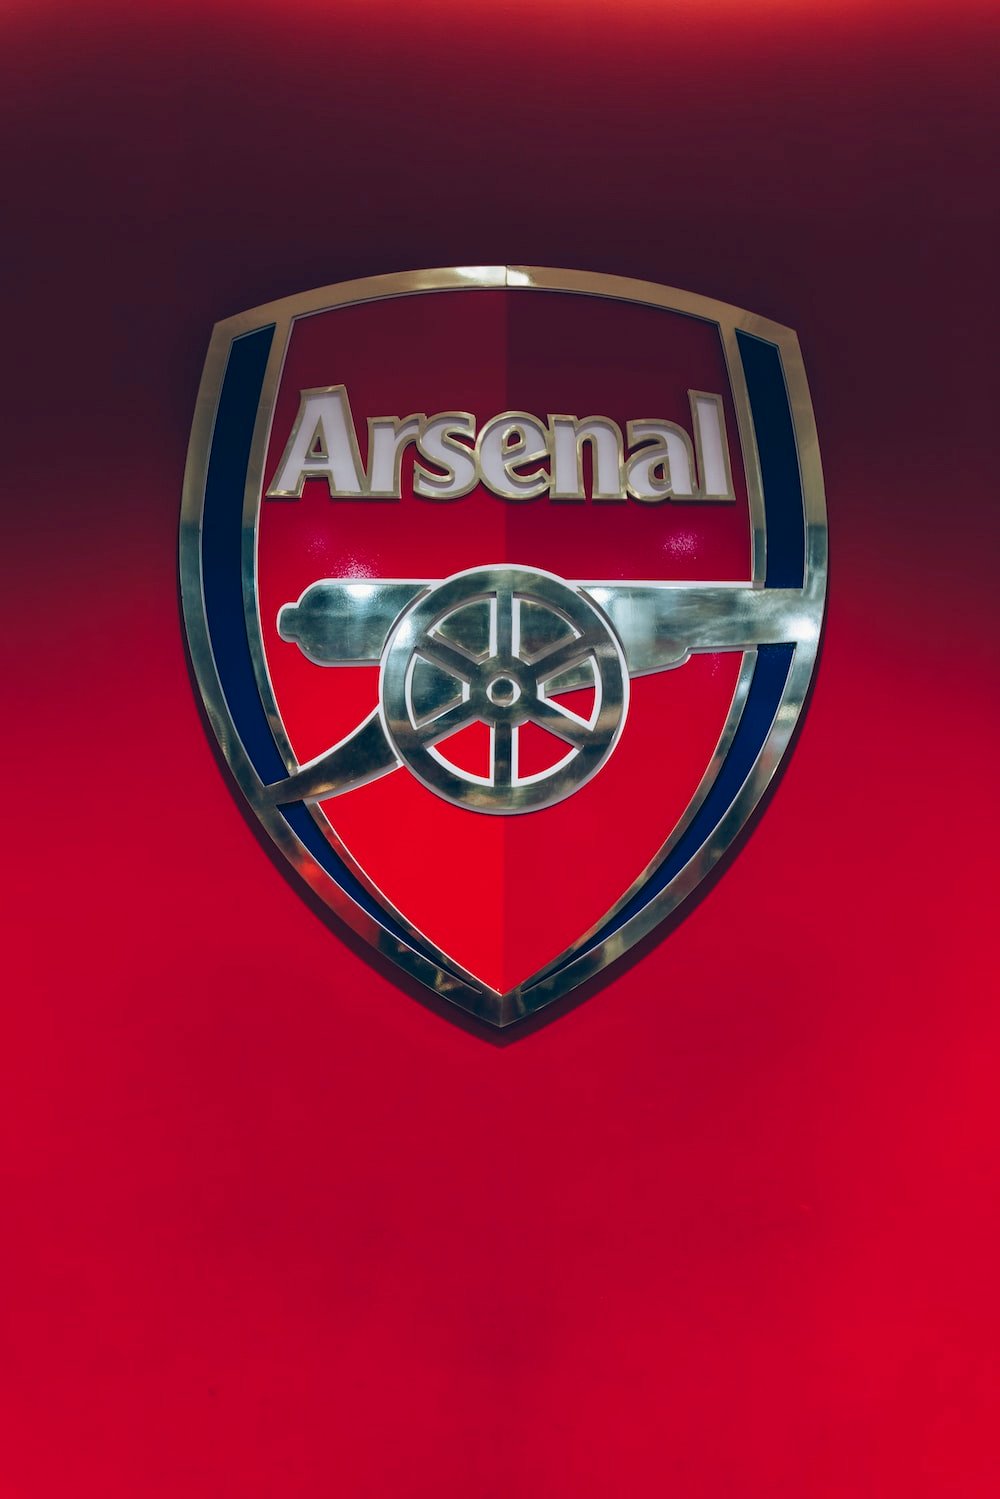 Arsenal Picture. Download Free Image